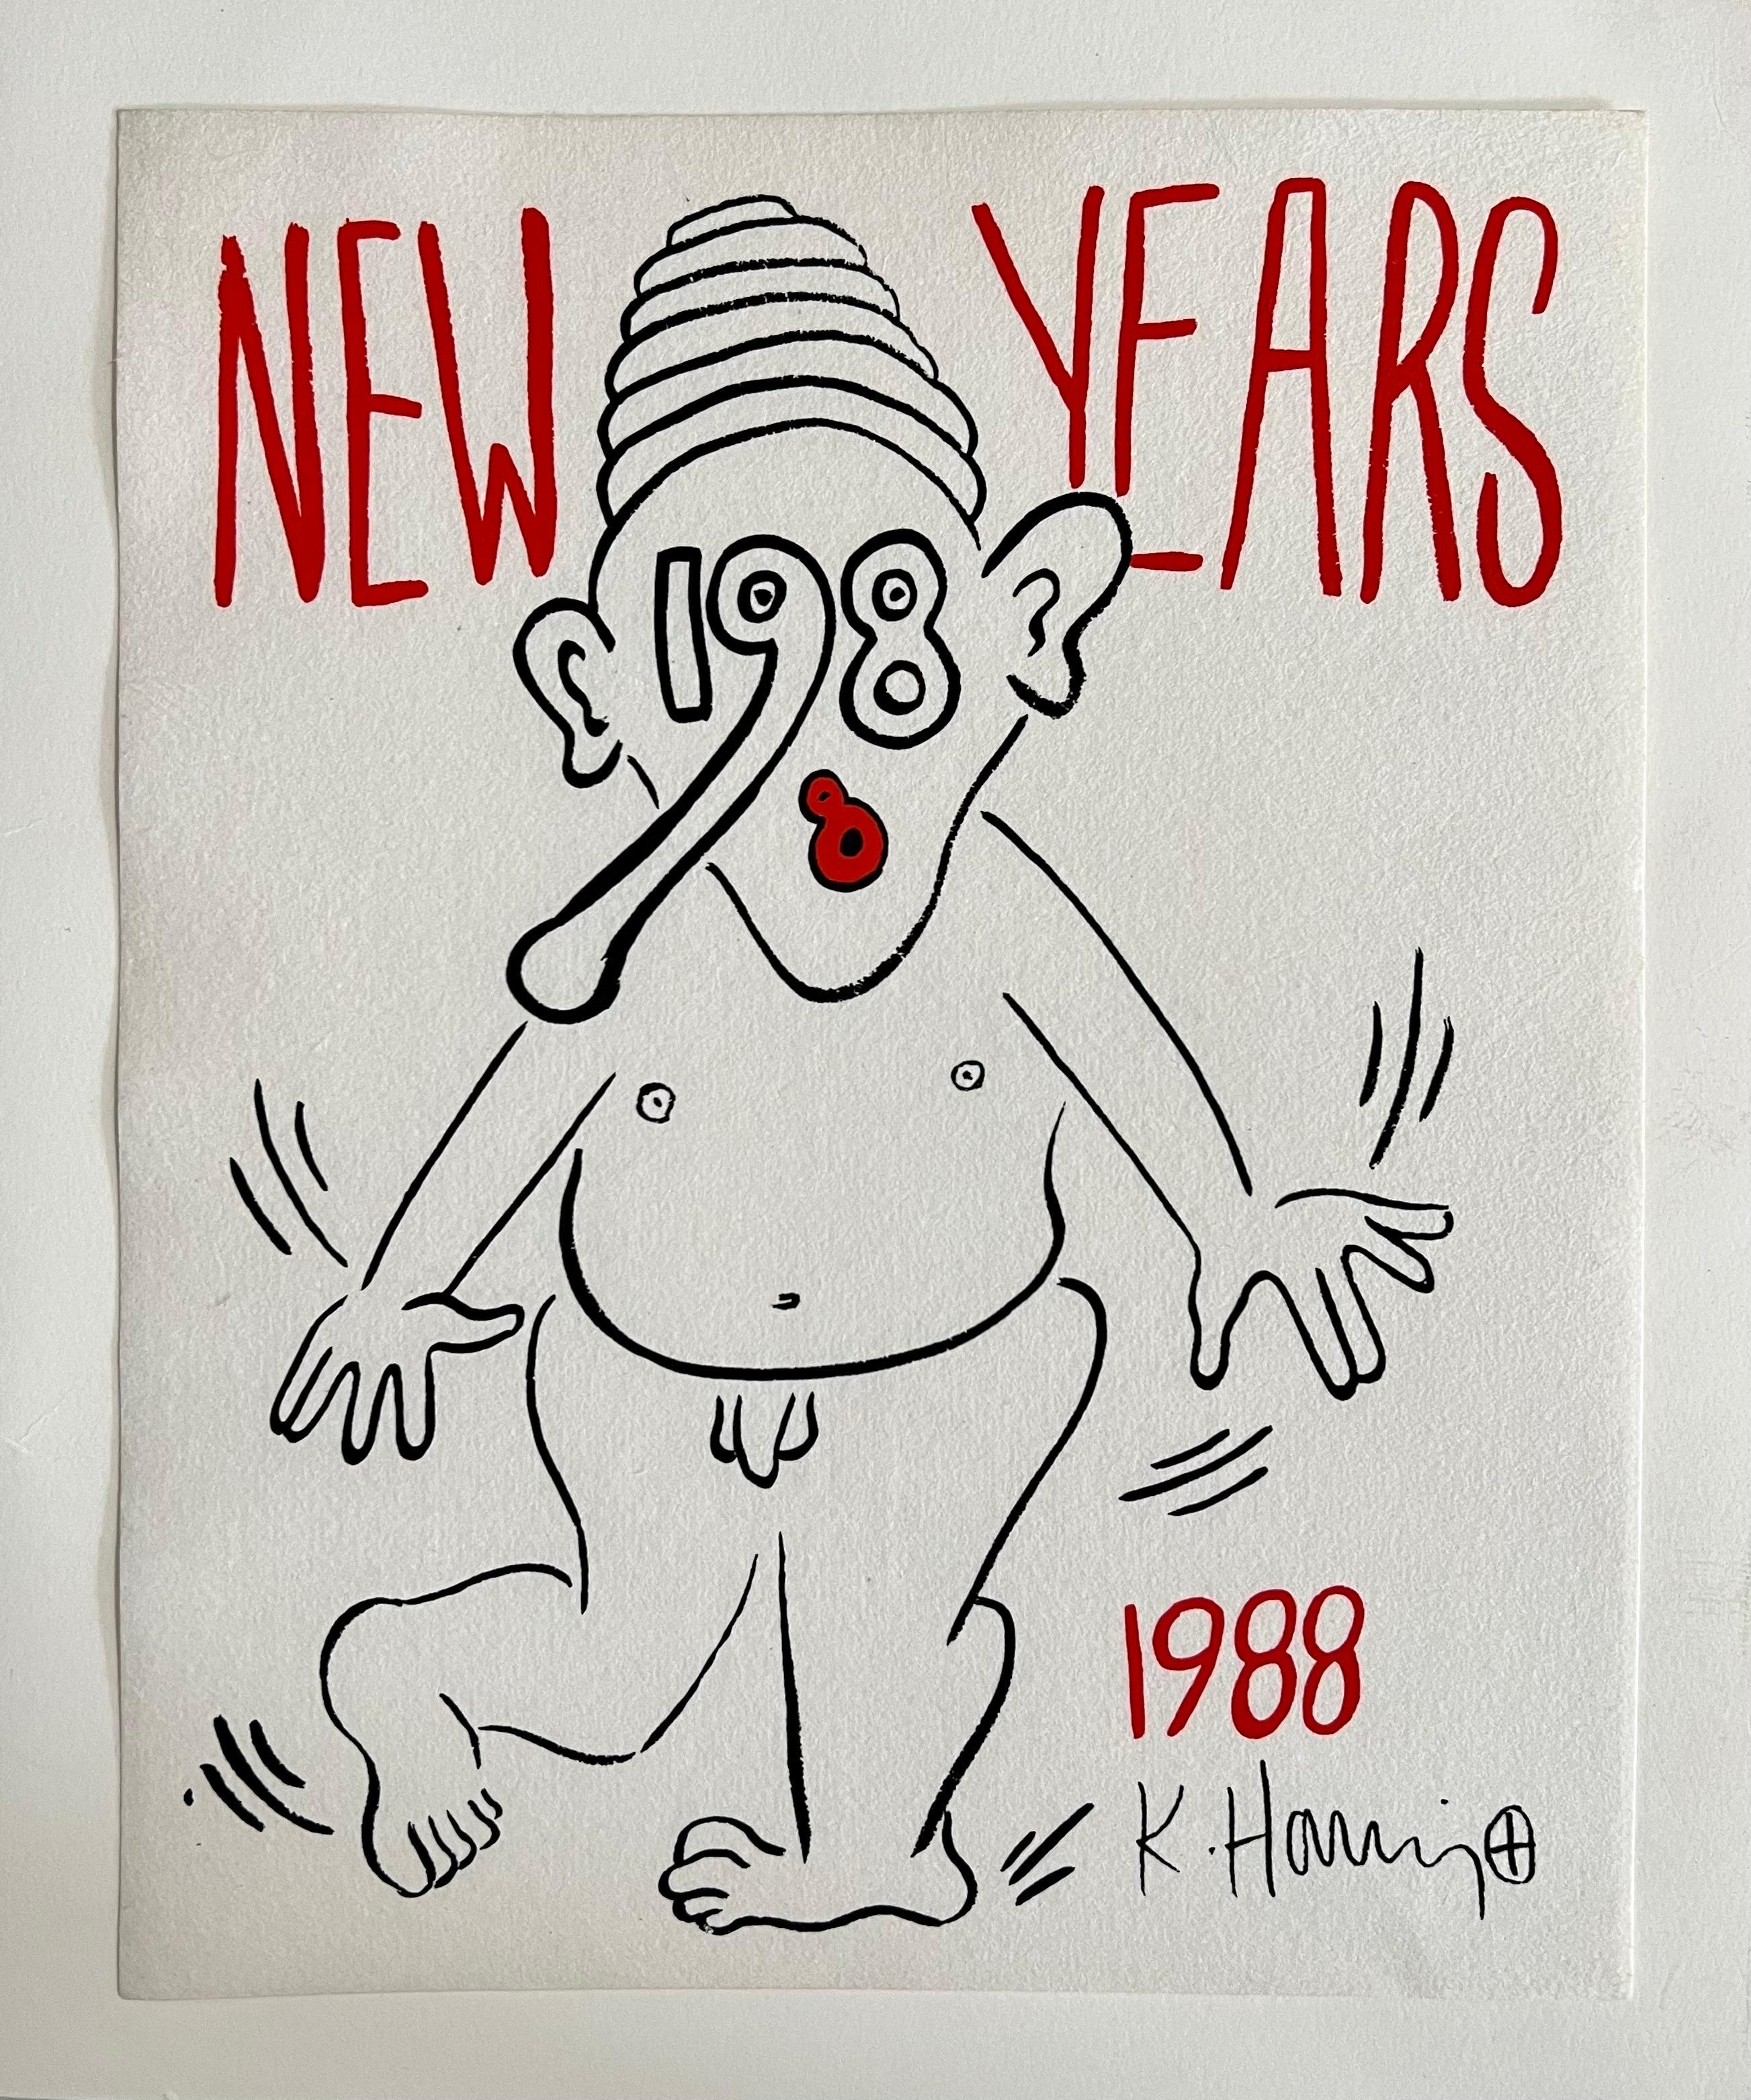 Artist:  Keith Haring, American (1958 - 1990)
Title:  New Year's Invitation 1988
Year:  1988
Medium:  Silkscreen on Paper
Image Size:  11 x 8 inches 
This bears a printed signature. It is not hand signed as issued.
 
Keith Allen Haring (May 4, 1958